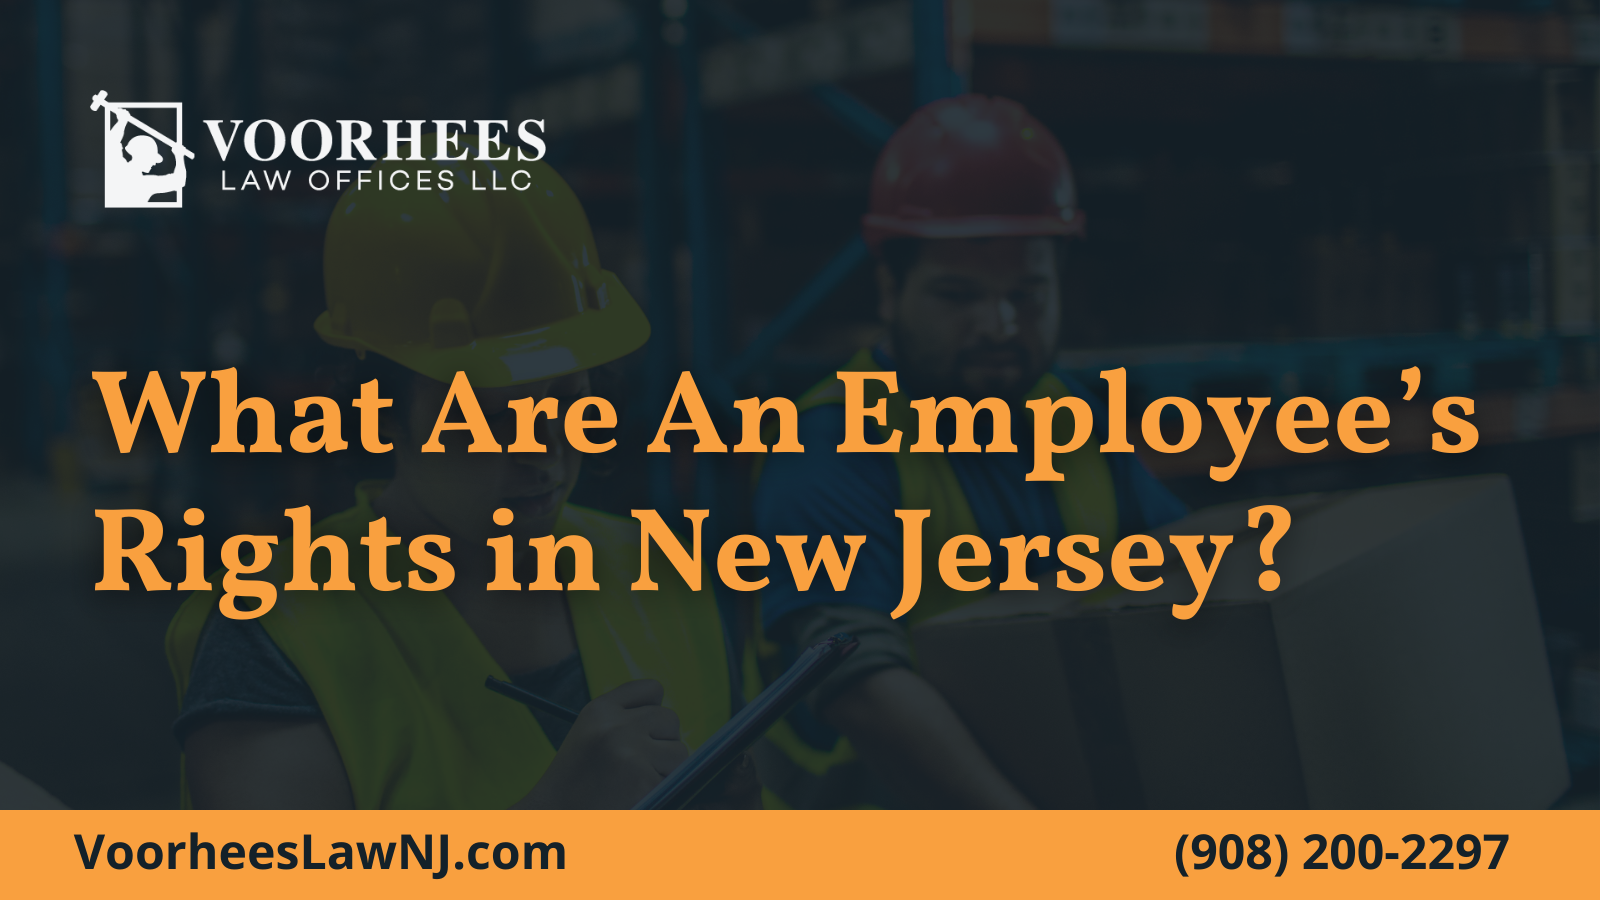 What Are An Employee’s Rights in New Jersey - Voorhees Law Offices new jersey workers comp and SSD attorney